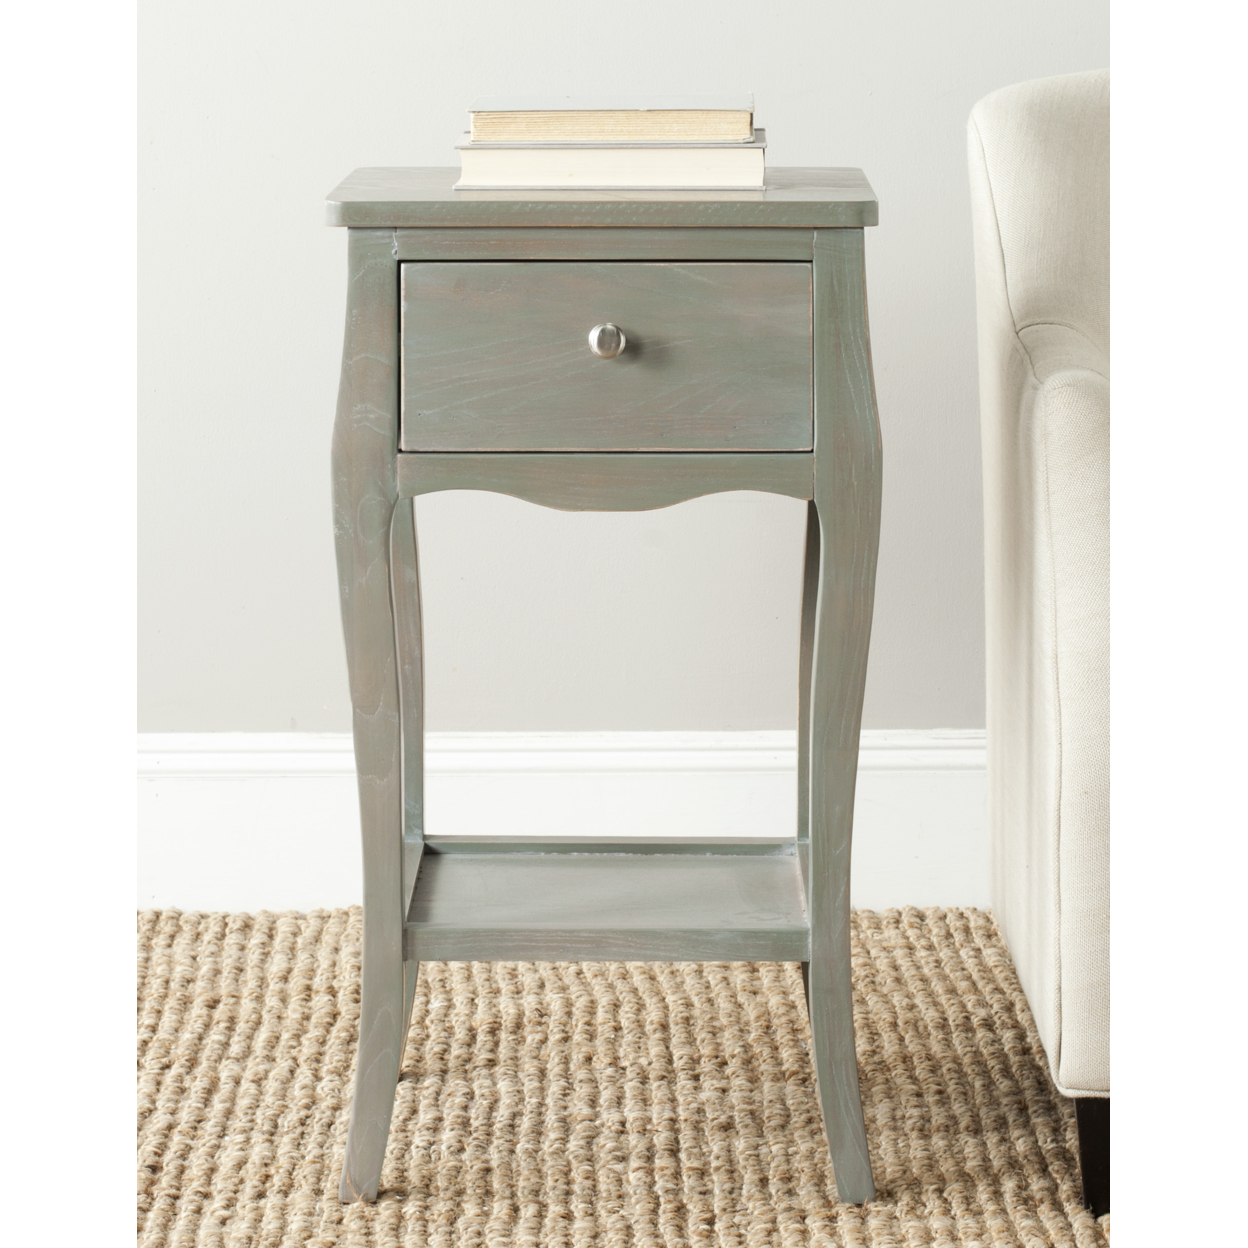 SAFAVIEH Thelma End Table With Storage Drawer Ash Grey